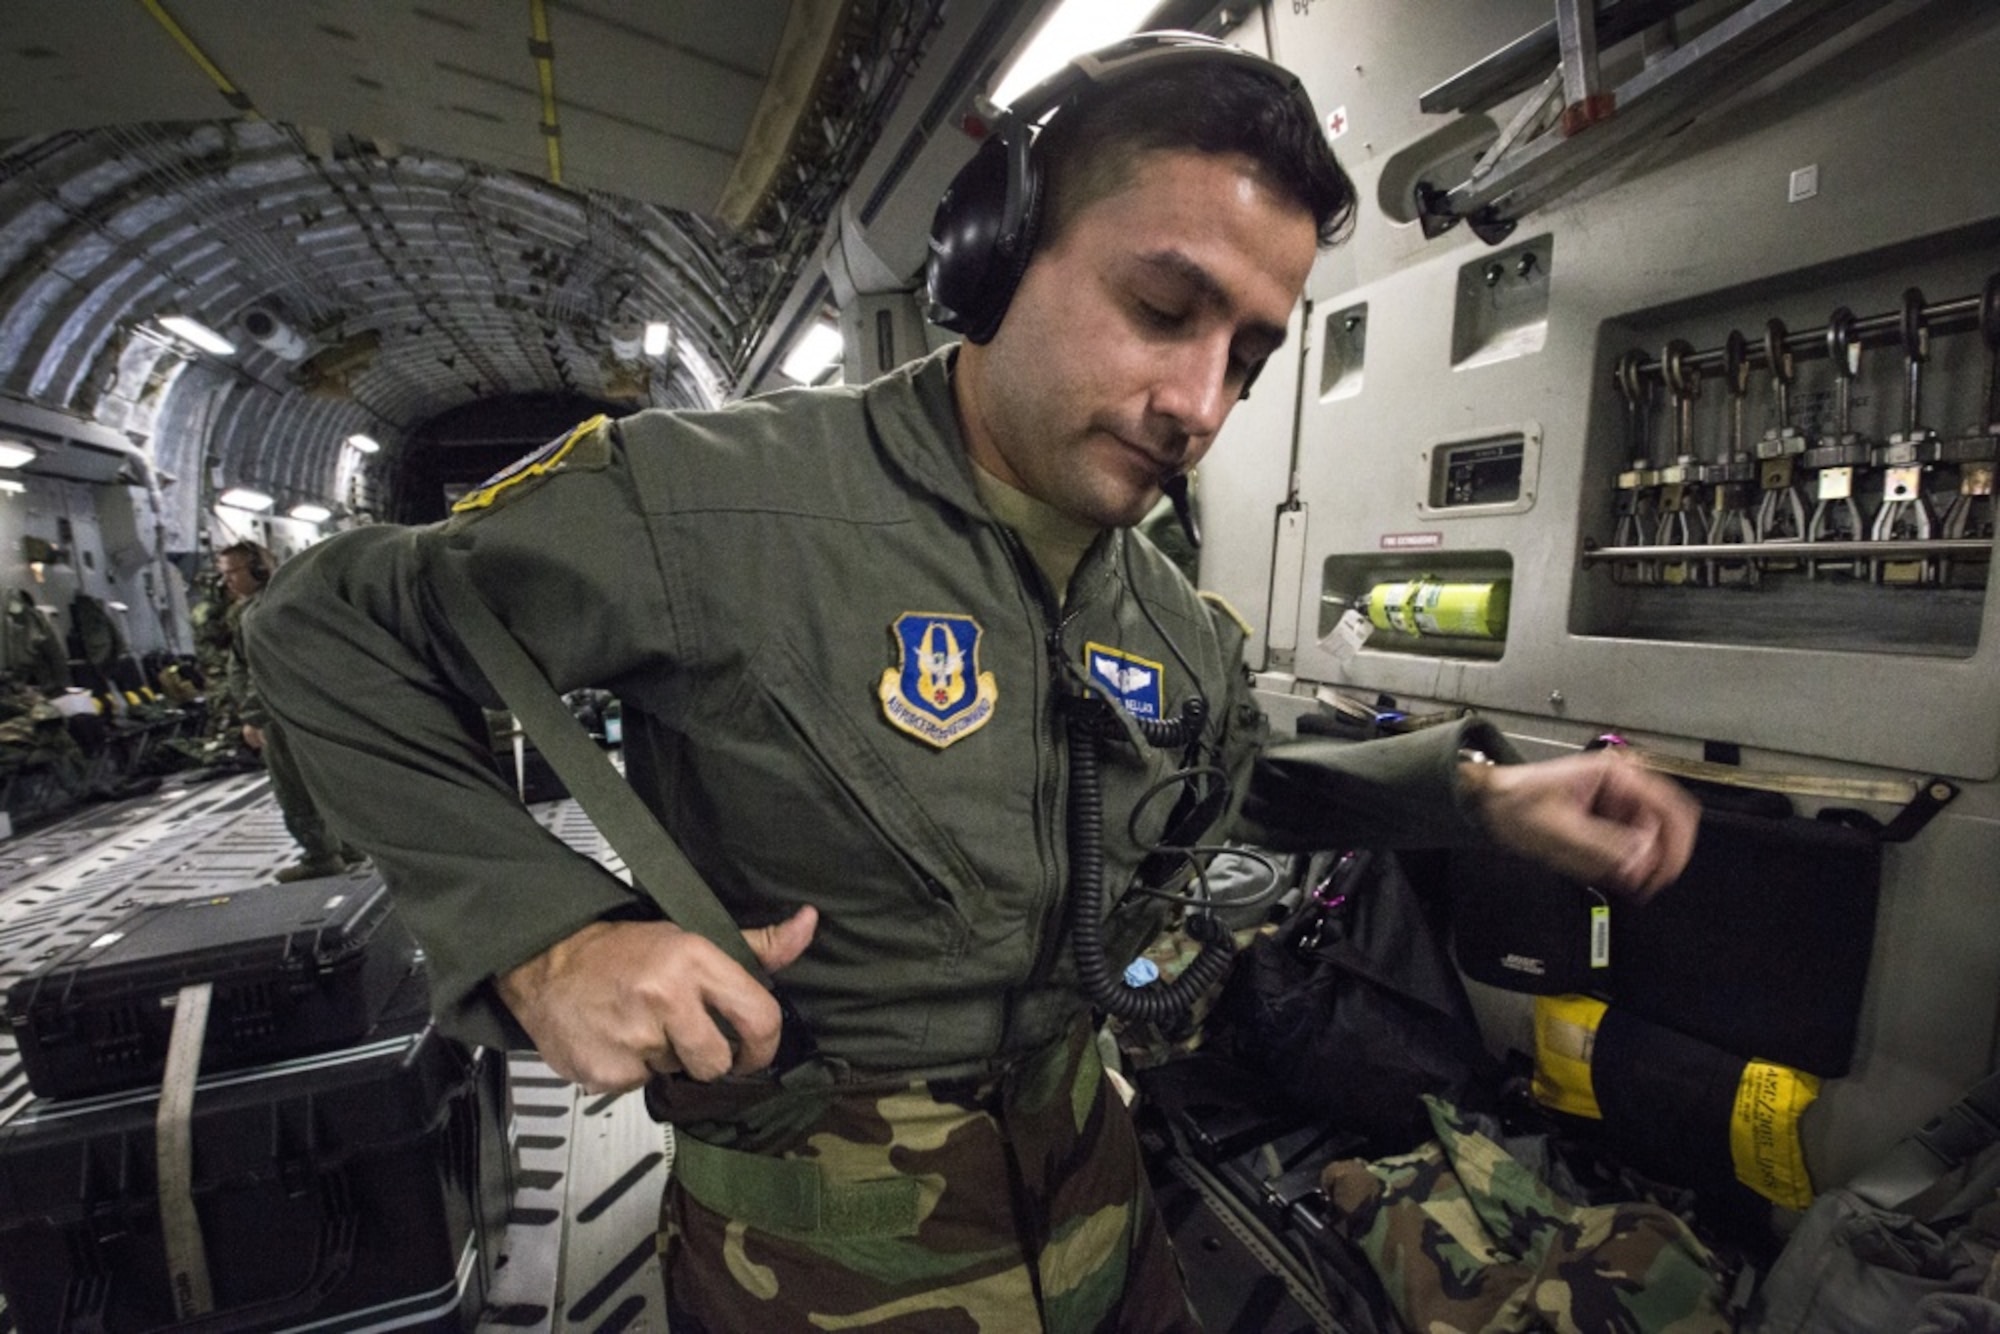 U.S. Air Force Tech. Sgt. Michael Bellack, an aeromedical evacuation technician with the 514th Aeromedical Evacuation (AE) Squadron, puts on his mission oriented protective posture gear during a joint training mission on a C-17 Globemaster III. As AE capabilities continue to evolve, teams continue to train to maintain their skills and be prepared for more challenging patient evacuations. (U.S. Air Force photo by Master Sgt. Mark C. Olsen)